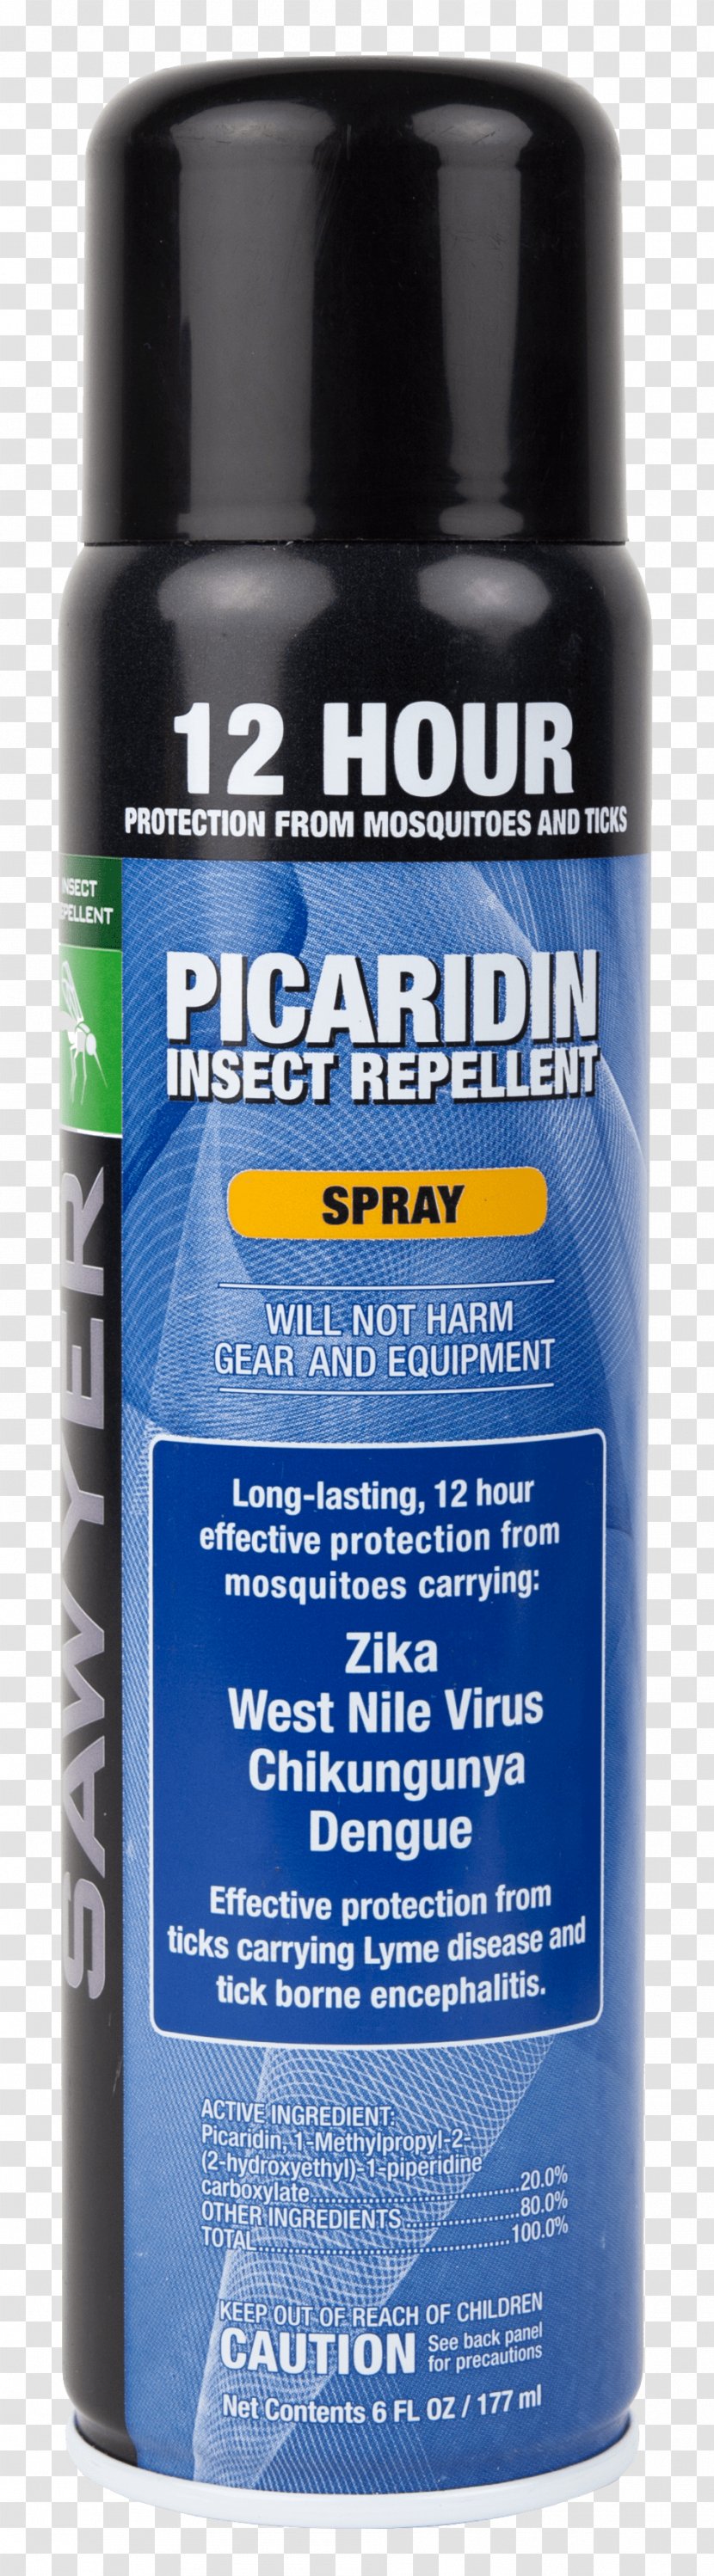 Mosquito Household Insect Repellents Lotion Icaridin Aerosol Spray Transparent PNG